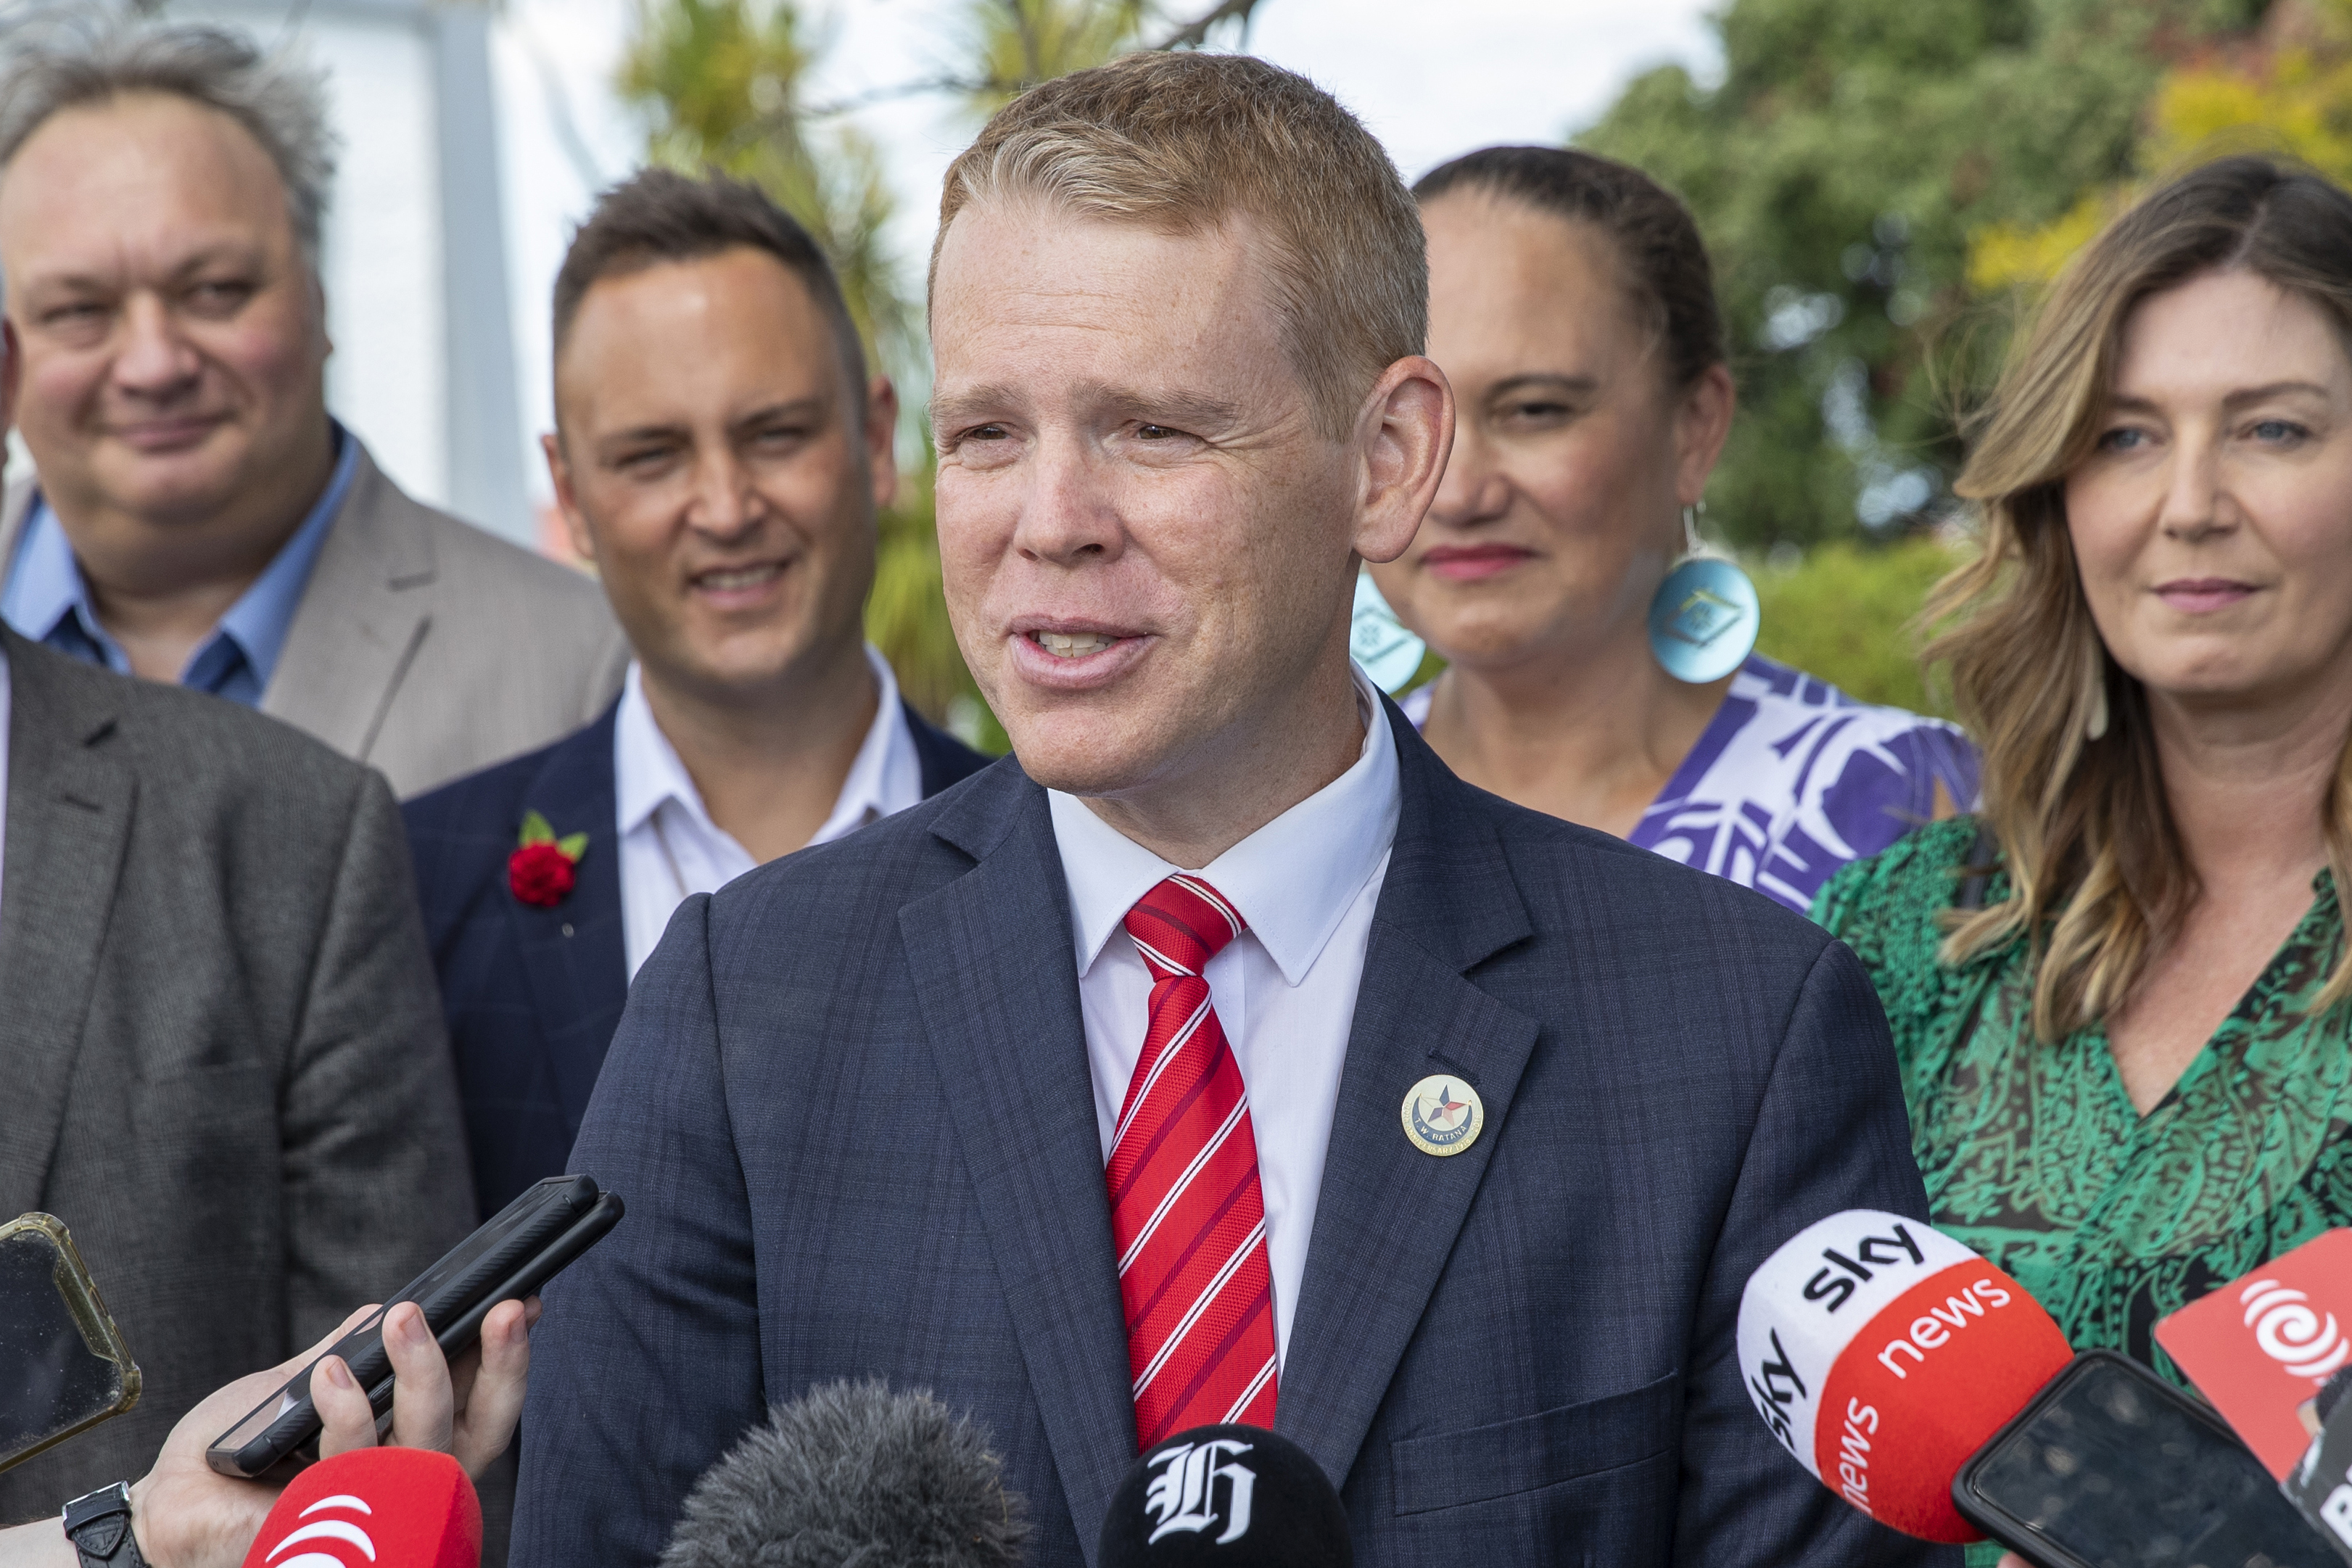 New Zealand's incoming Prime Minister Chris Hipkins speaks in Ratana, New Zealand, Tuesday, Jan. 24, 2023 